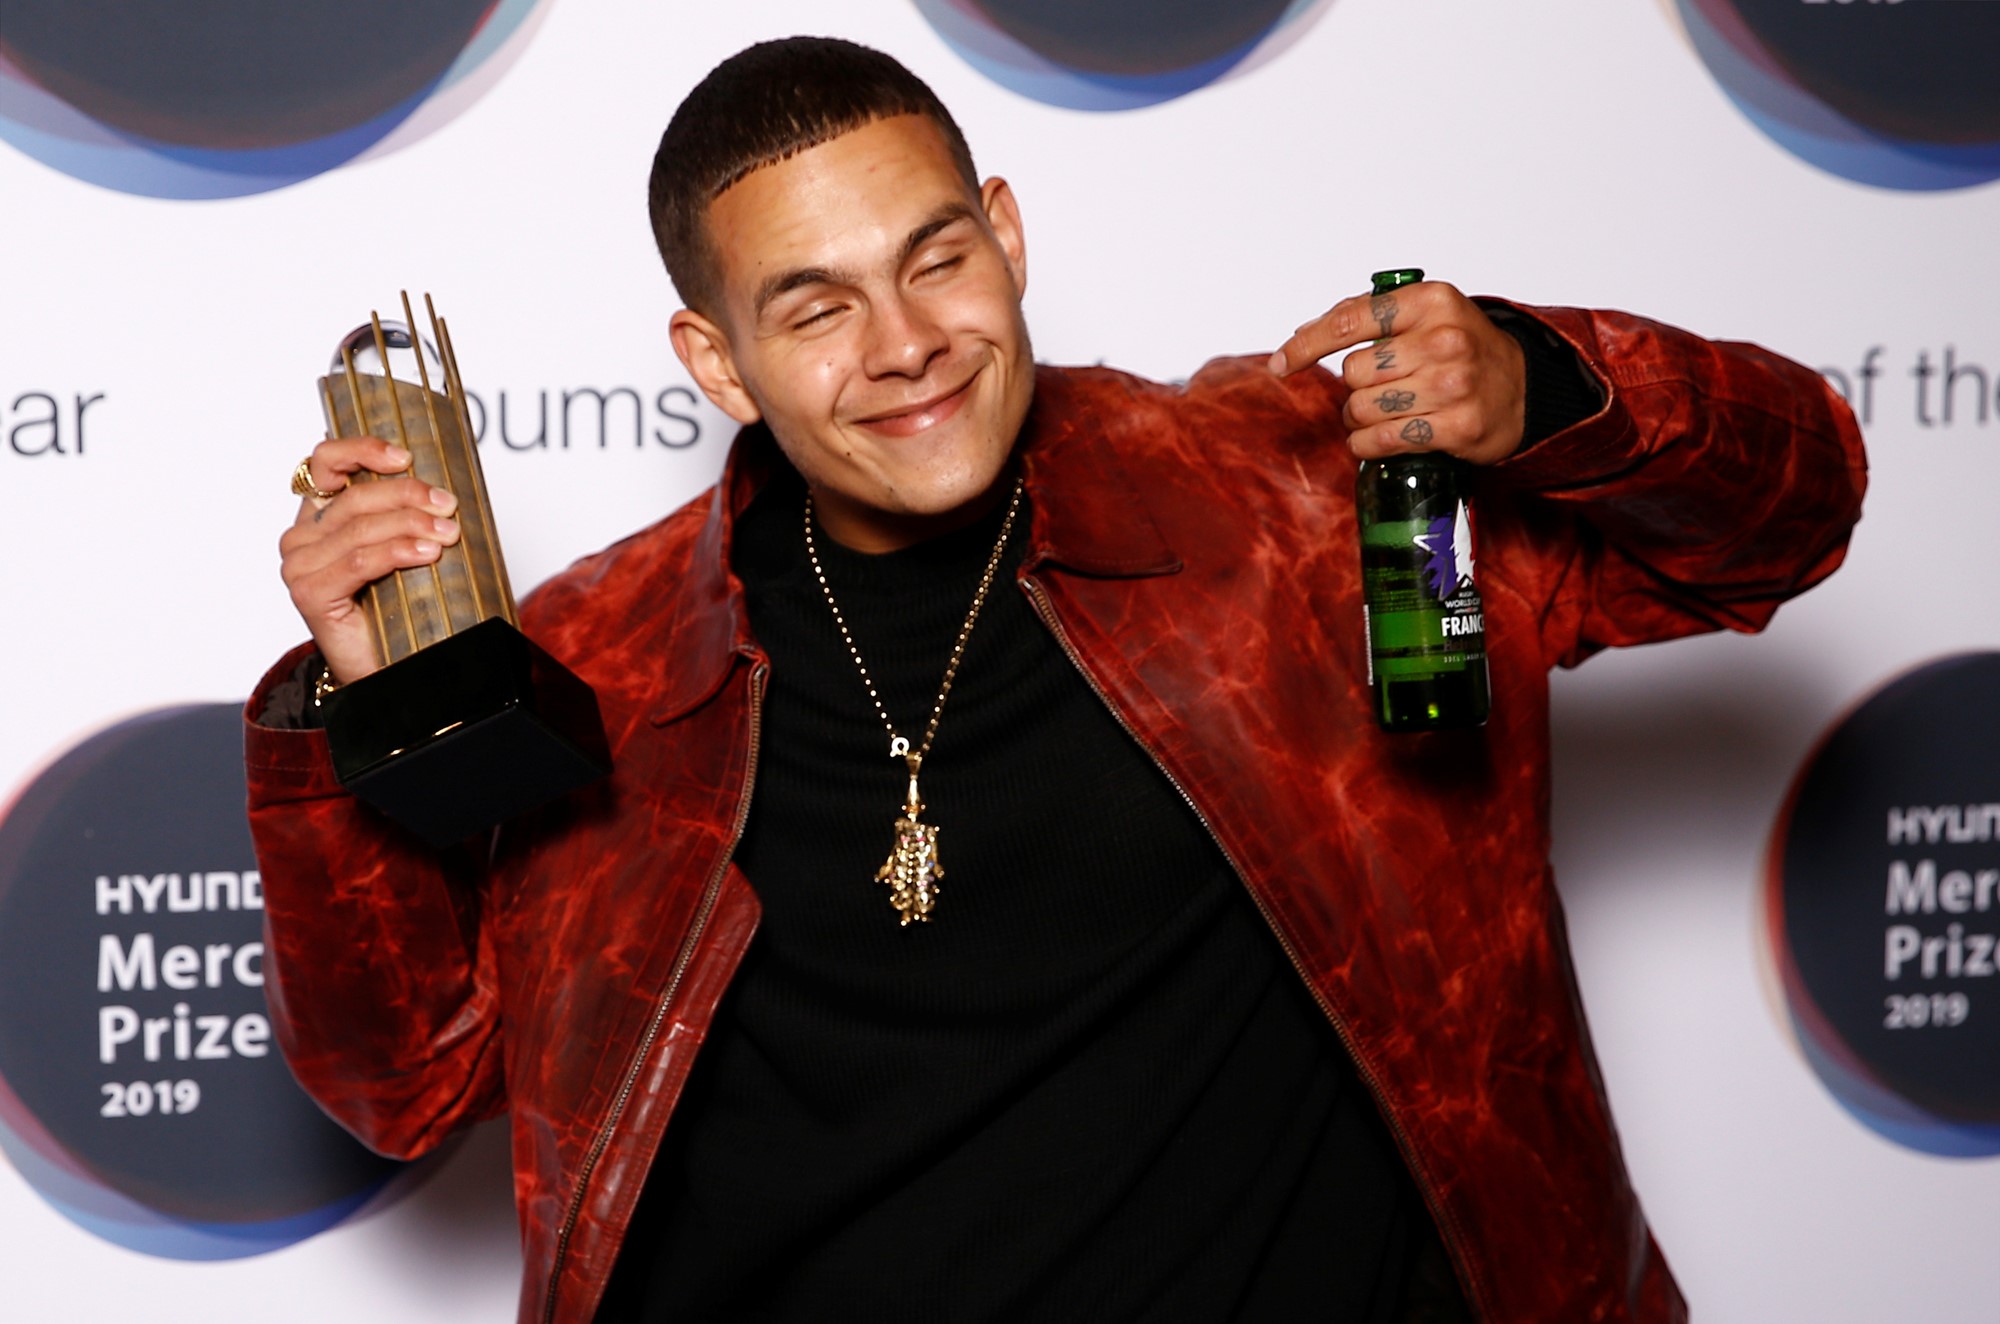 A man holding an award and a beer, smiles next to a Mercury Prize press backdrop